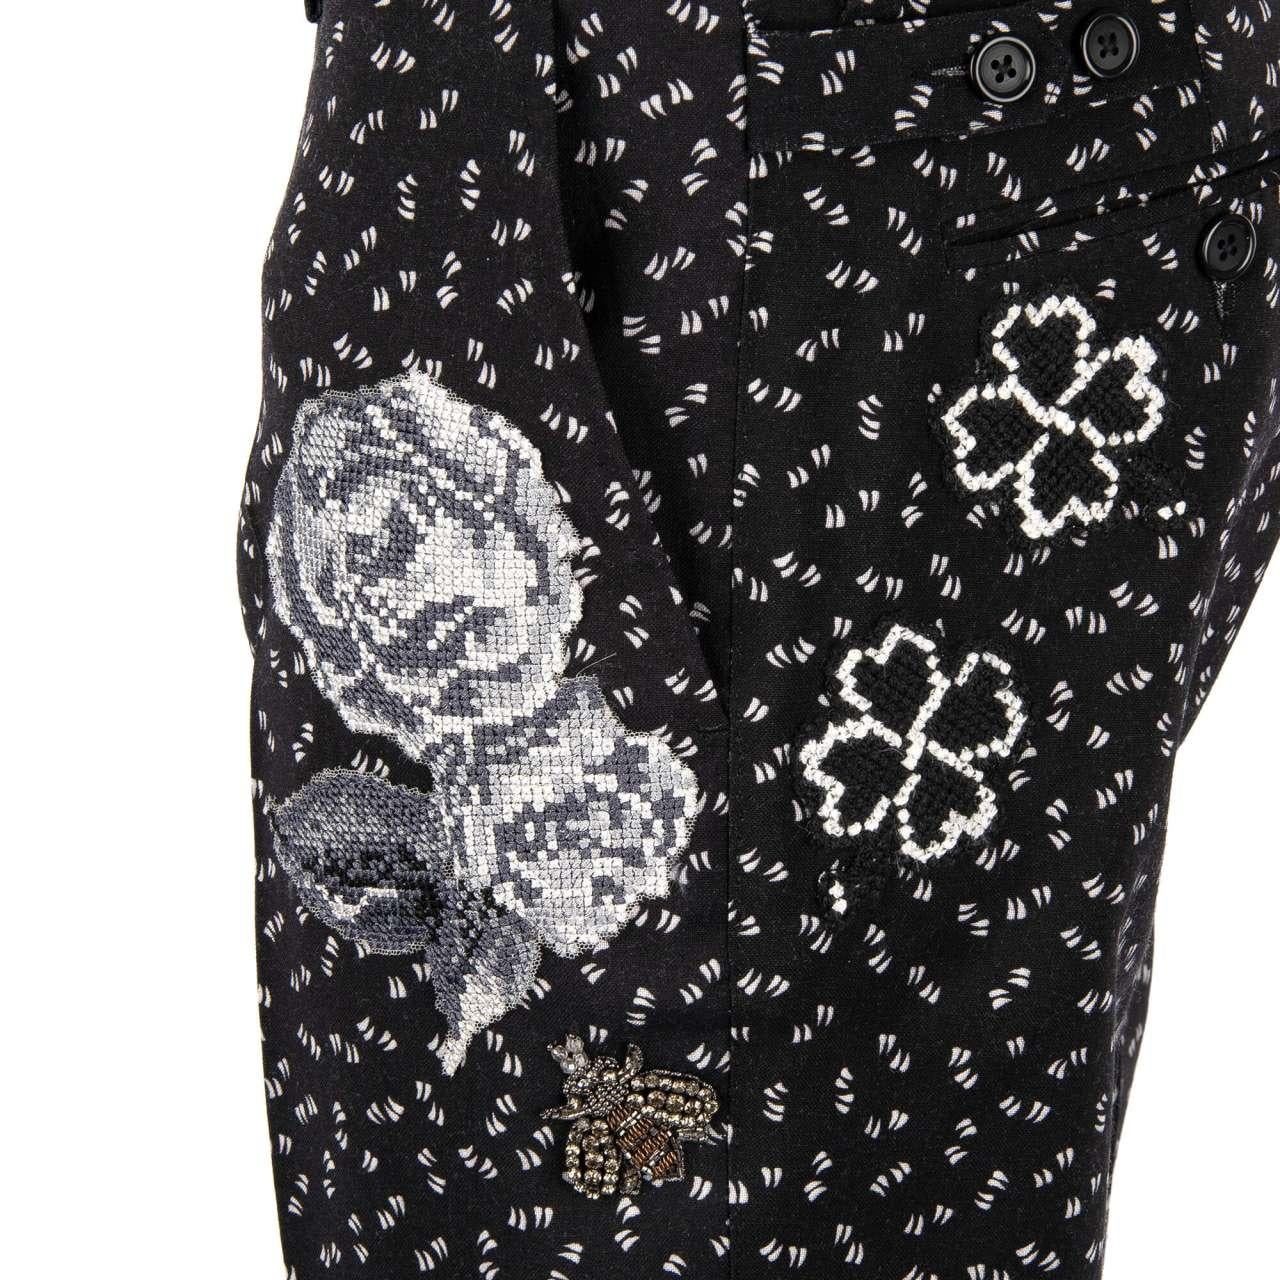 D&G - Virgin Wool Trousers with Flowers, Crown and Bee Embroidery Black 48 For Sale 3